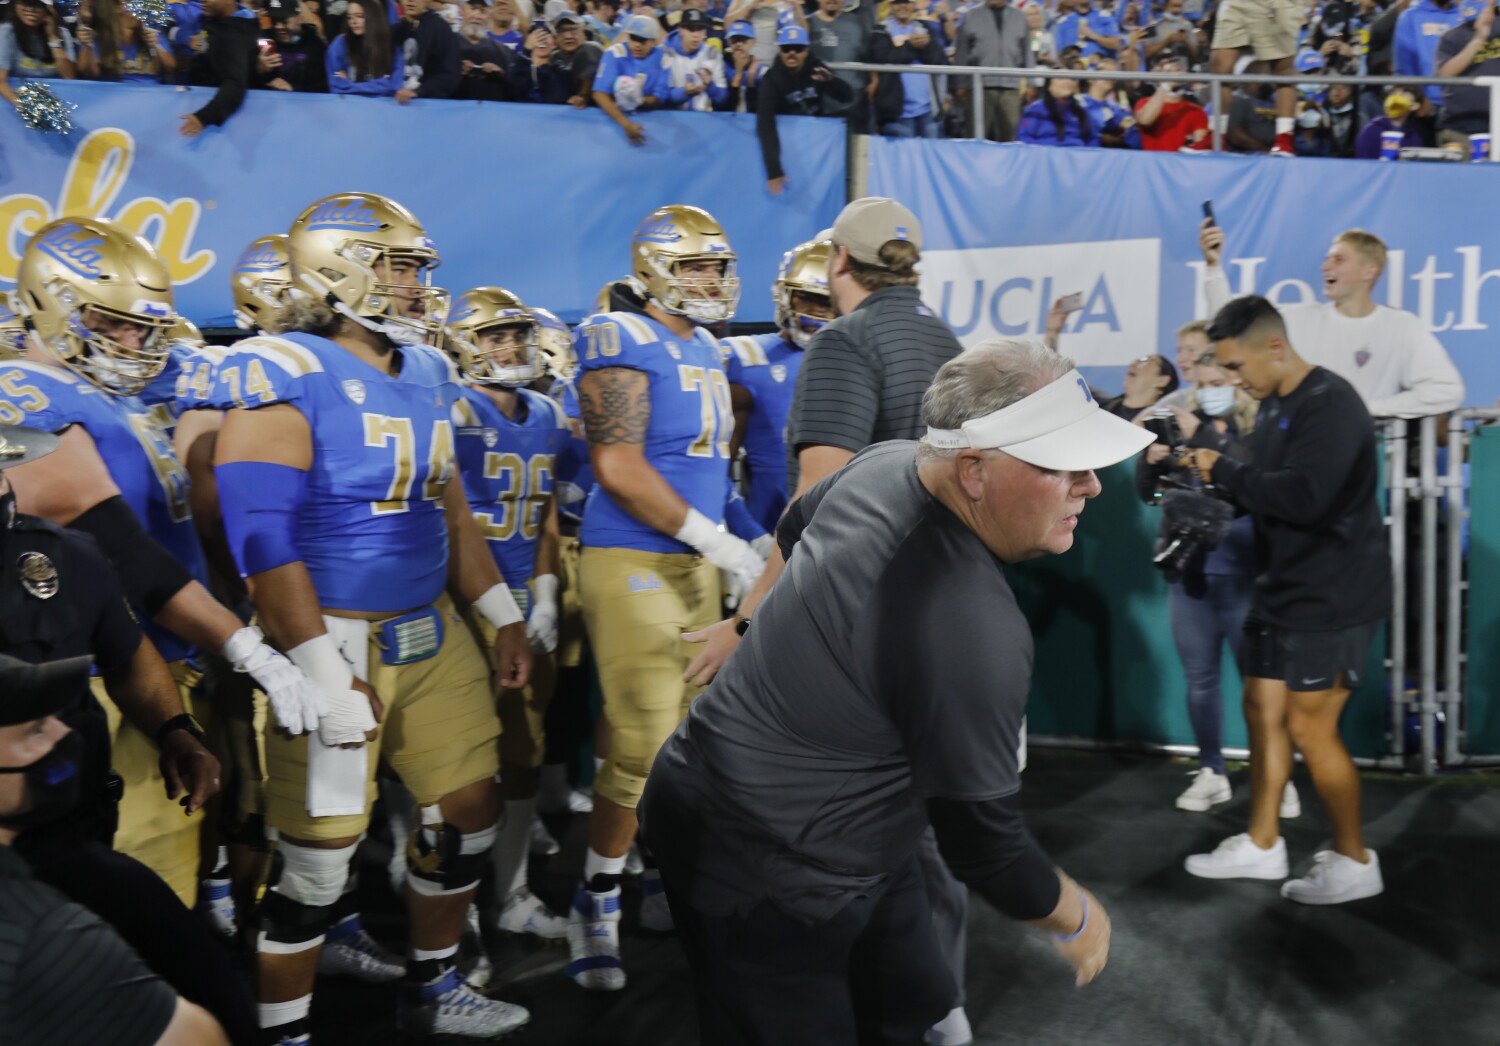 Letters to Sports: It's time for UCLA football team to make changes